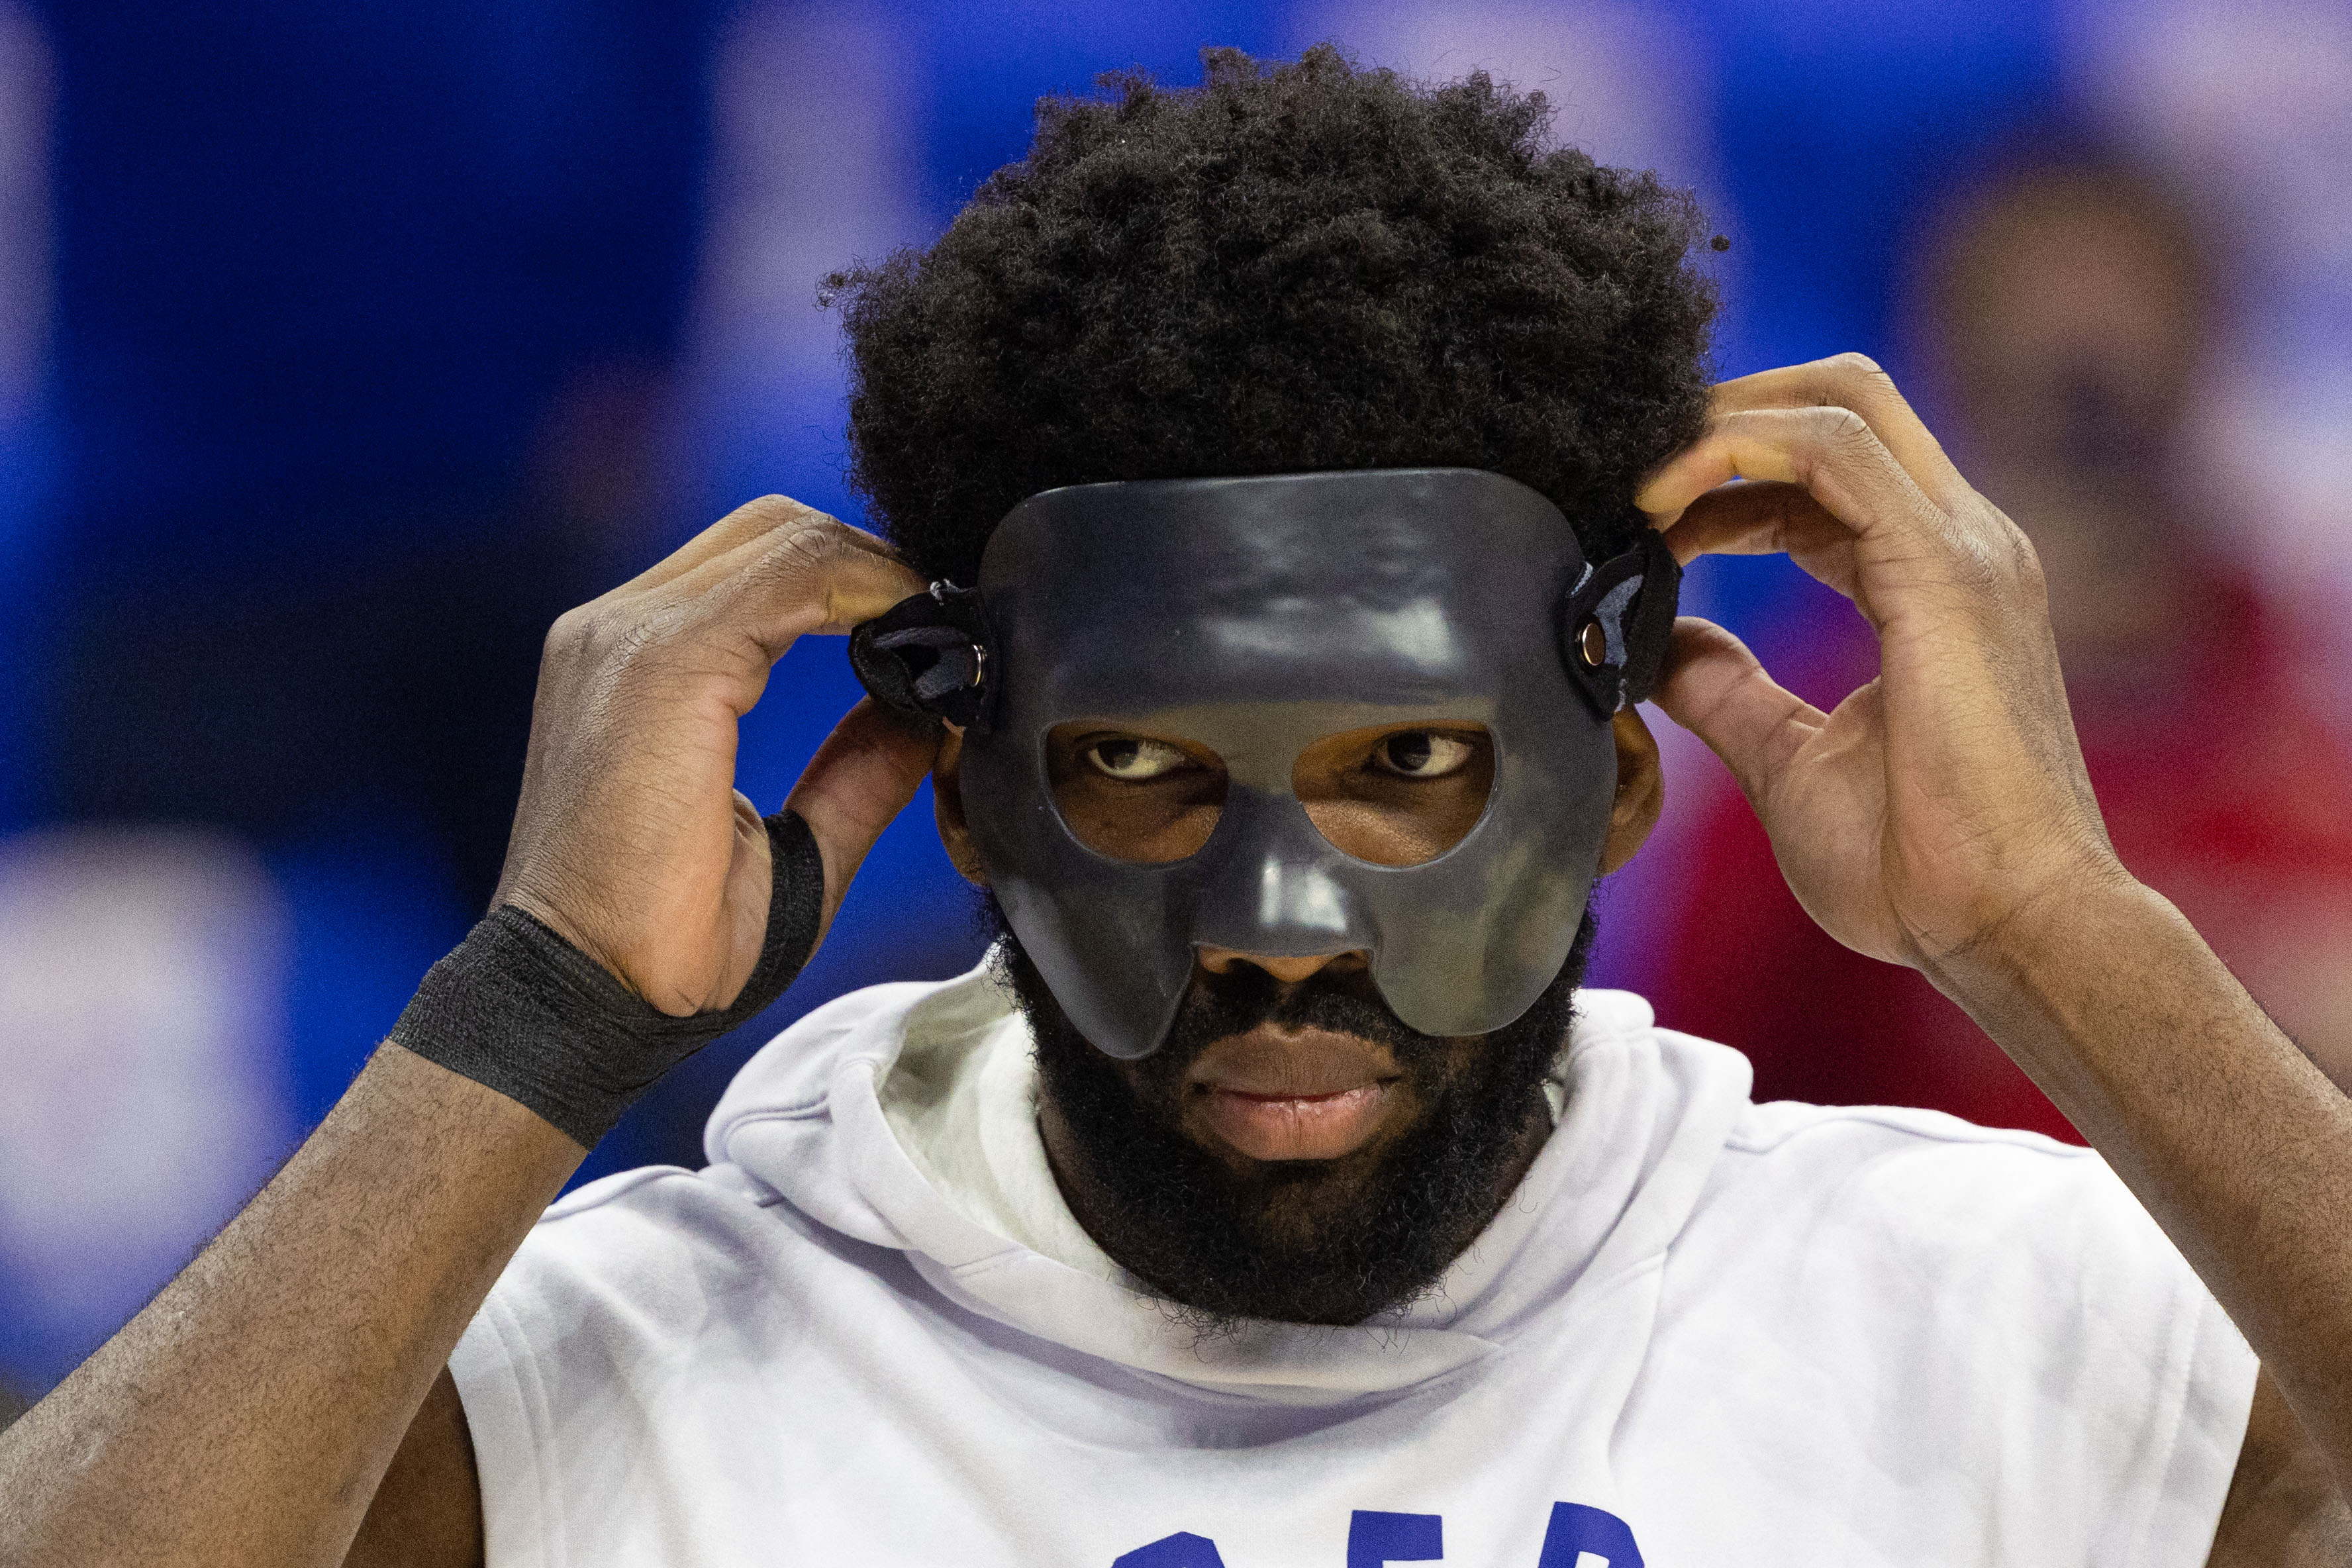 Does Embiid have eyes to join the French national team in Paris 2024?